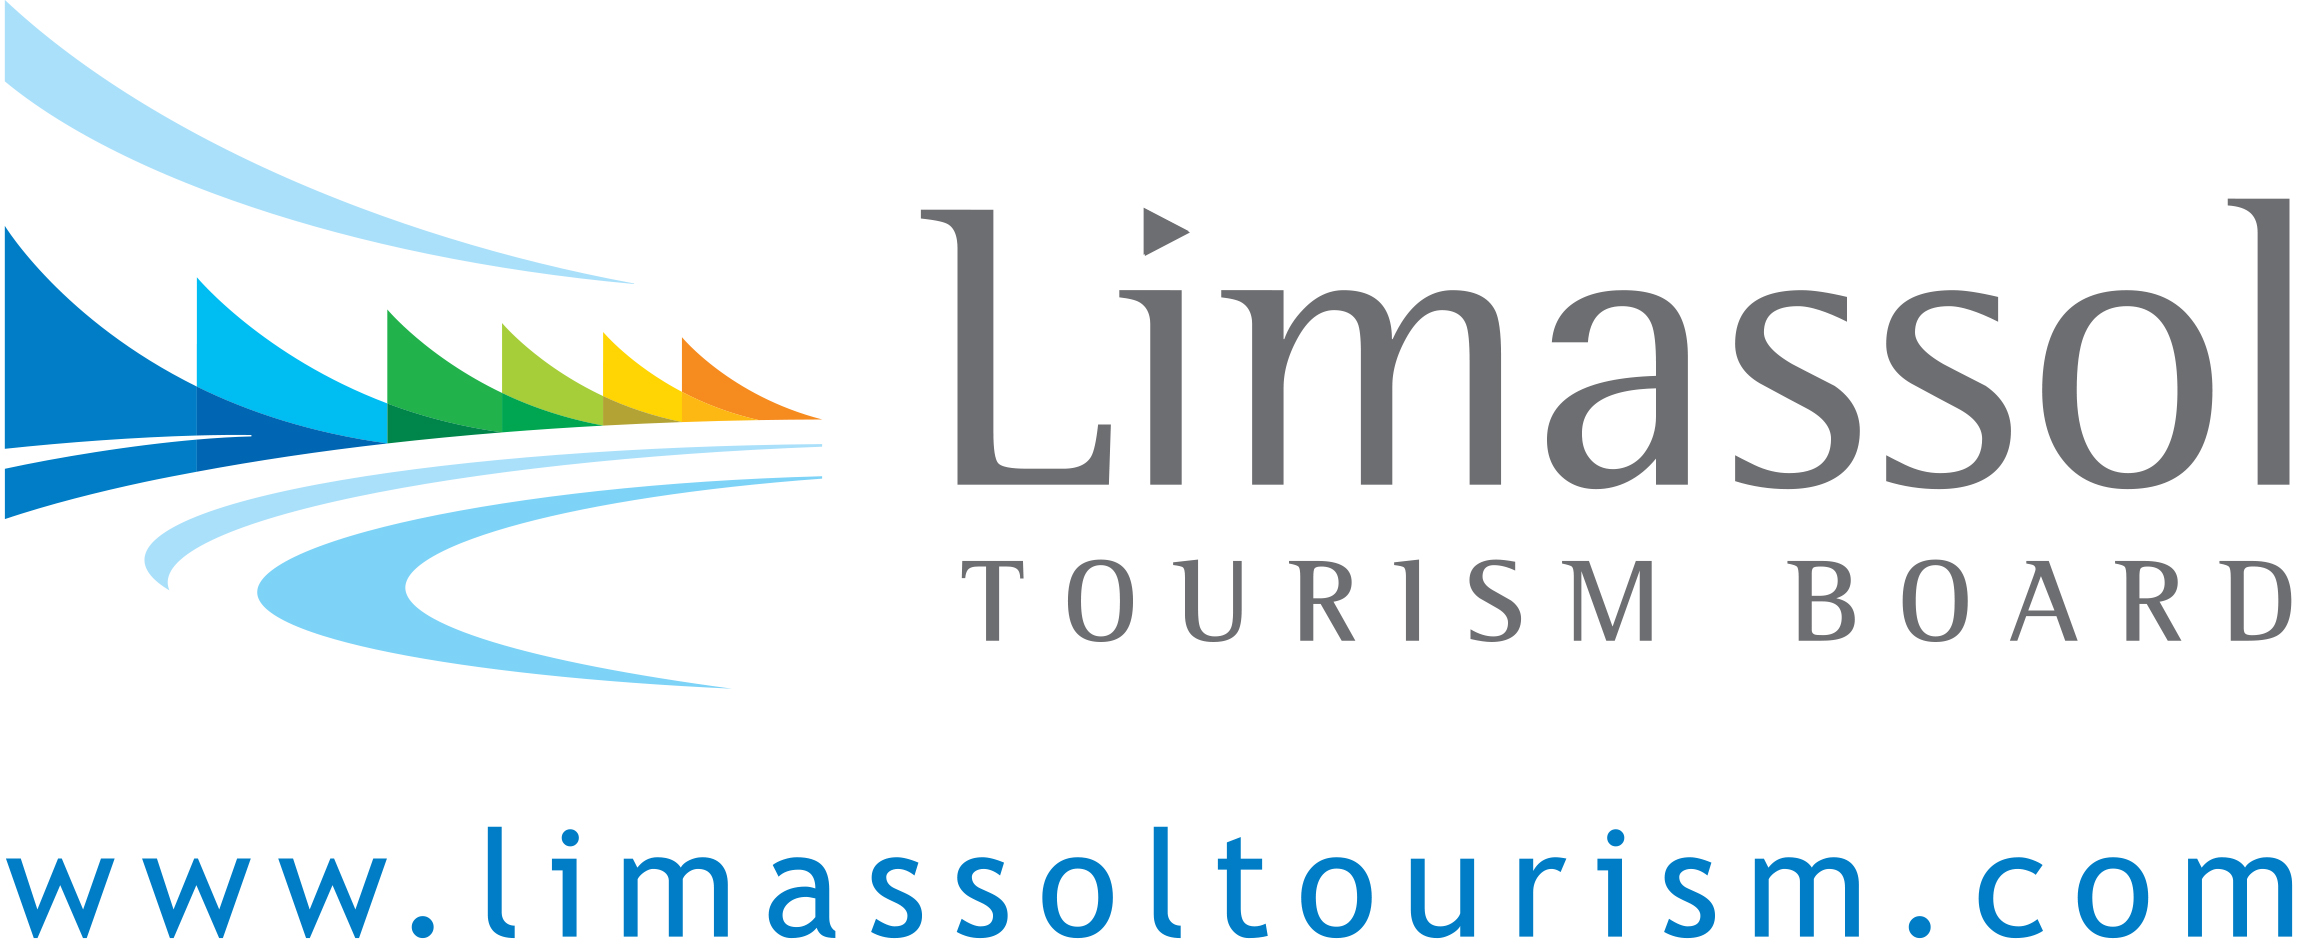 tourism company in limassol